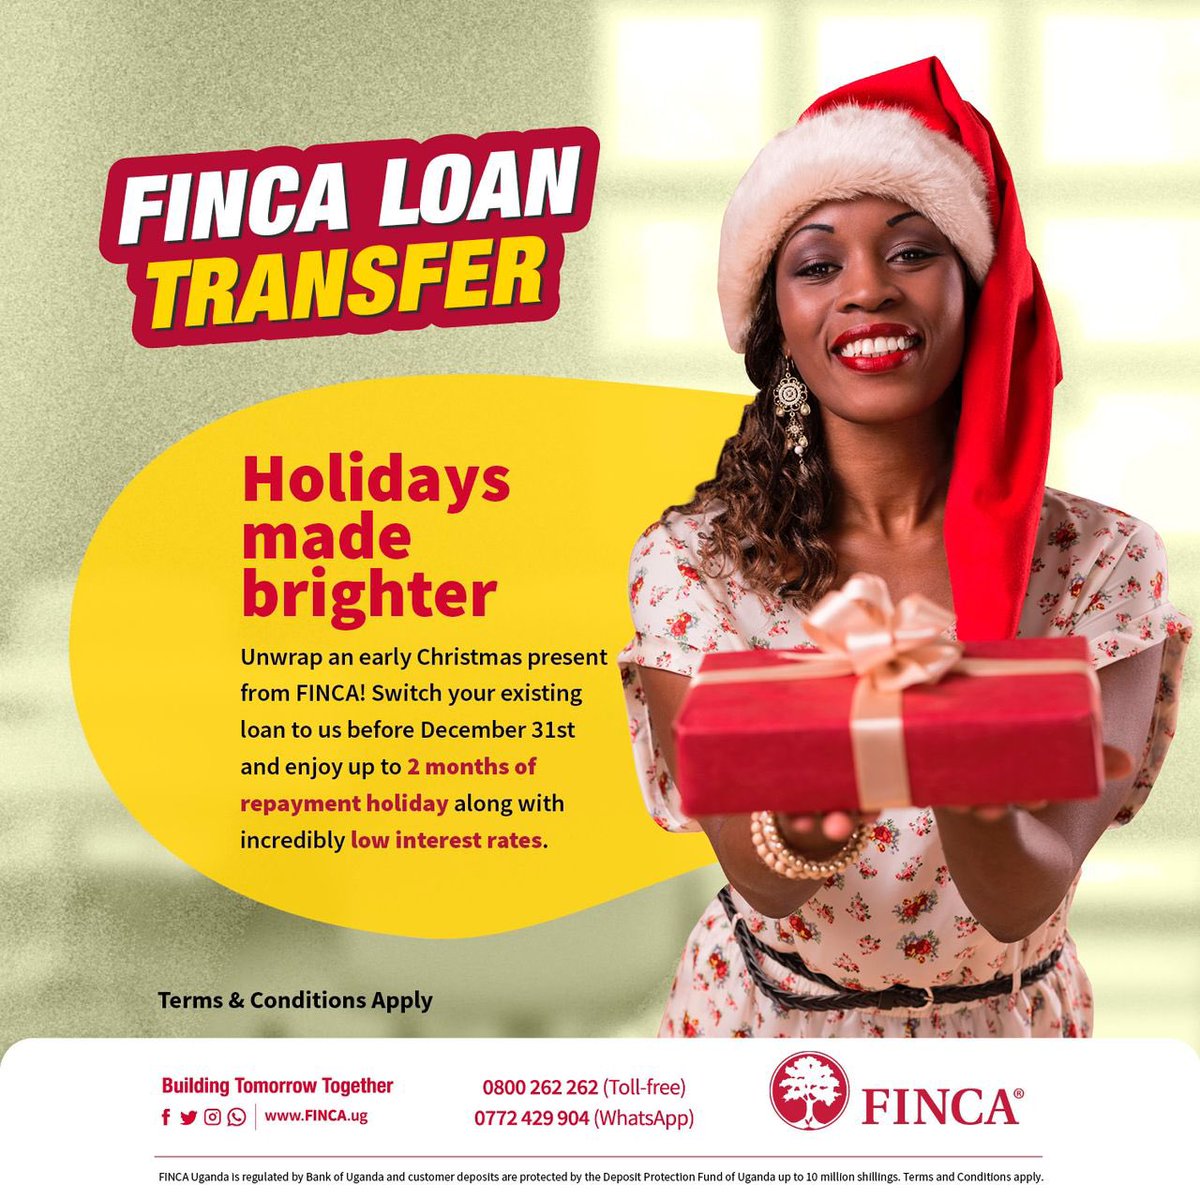 Switch your existing loan to @FINCA_Uganda before 31st December and enjoy up to 2 months repayment holiday along with incredibly low interest rates. #BalanceTransfer | #TomorrowIsHere